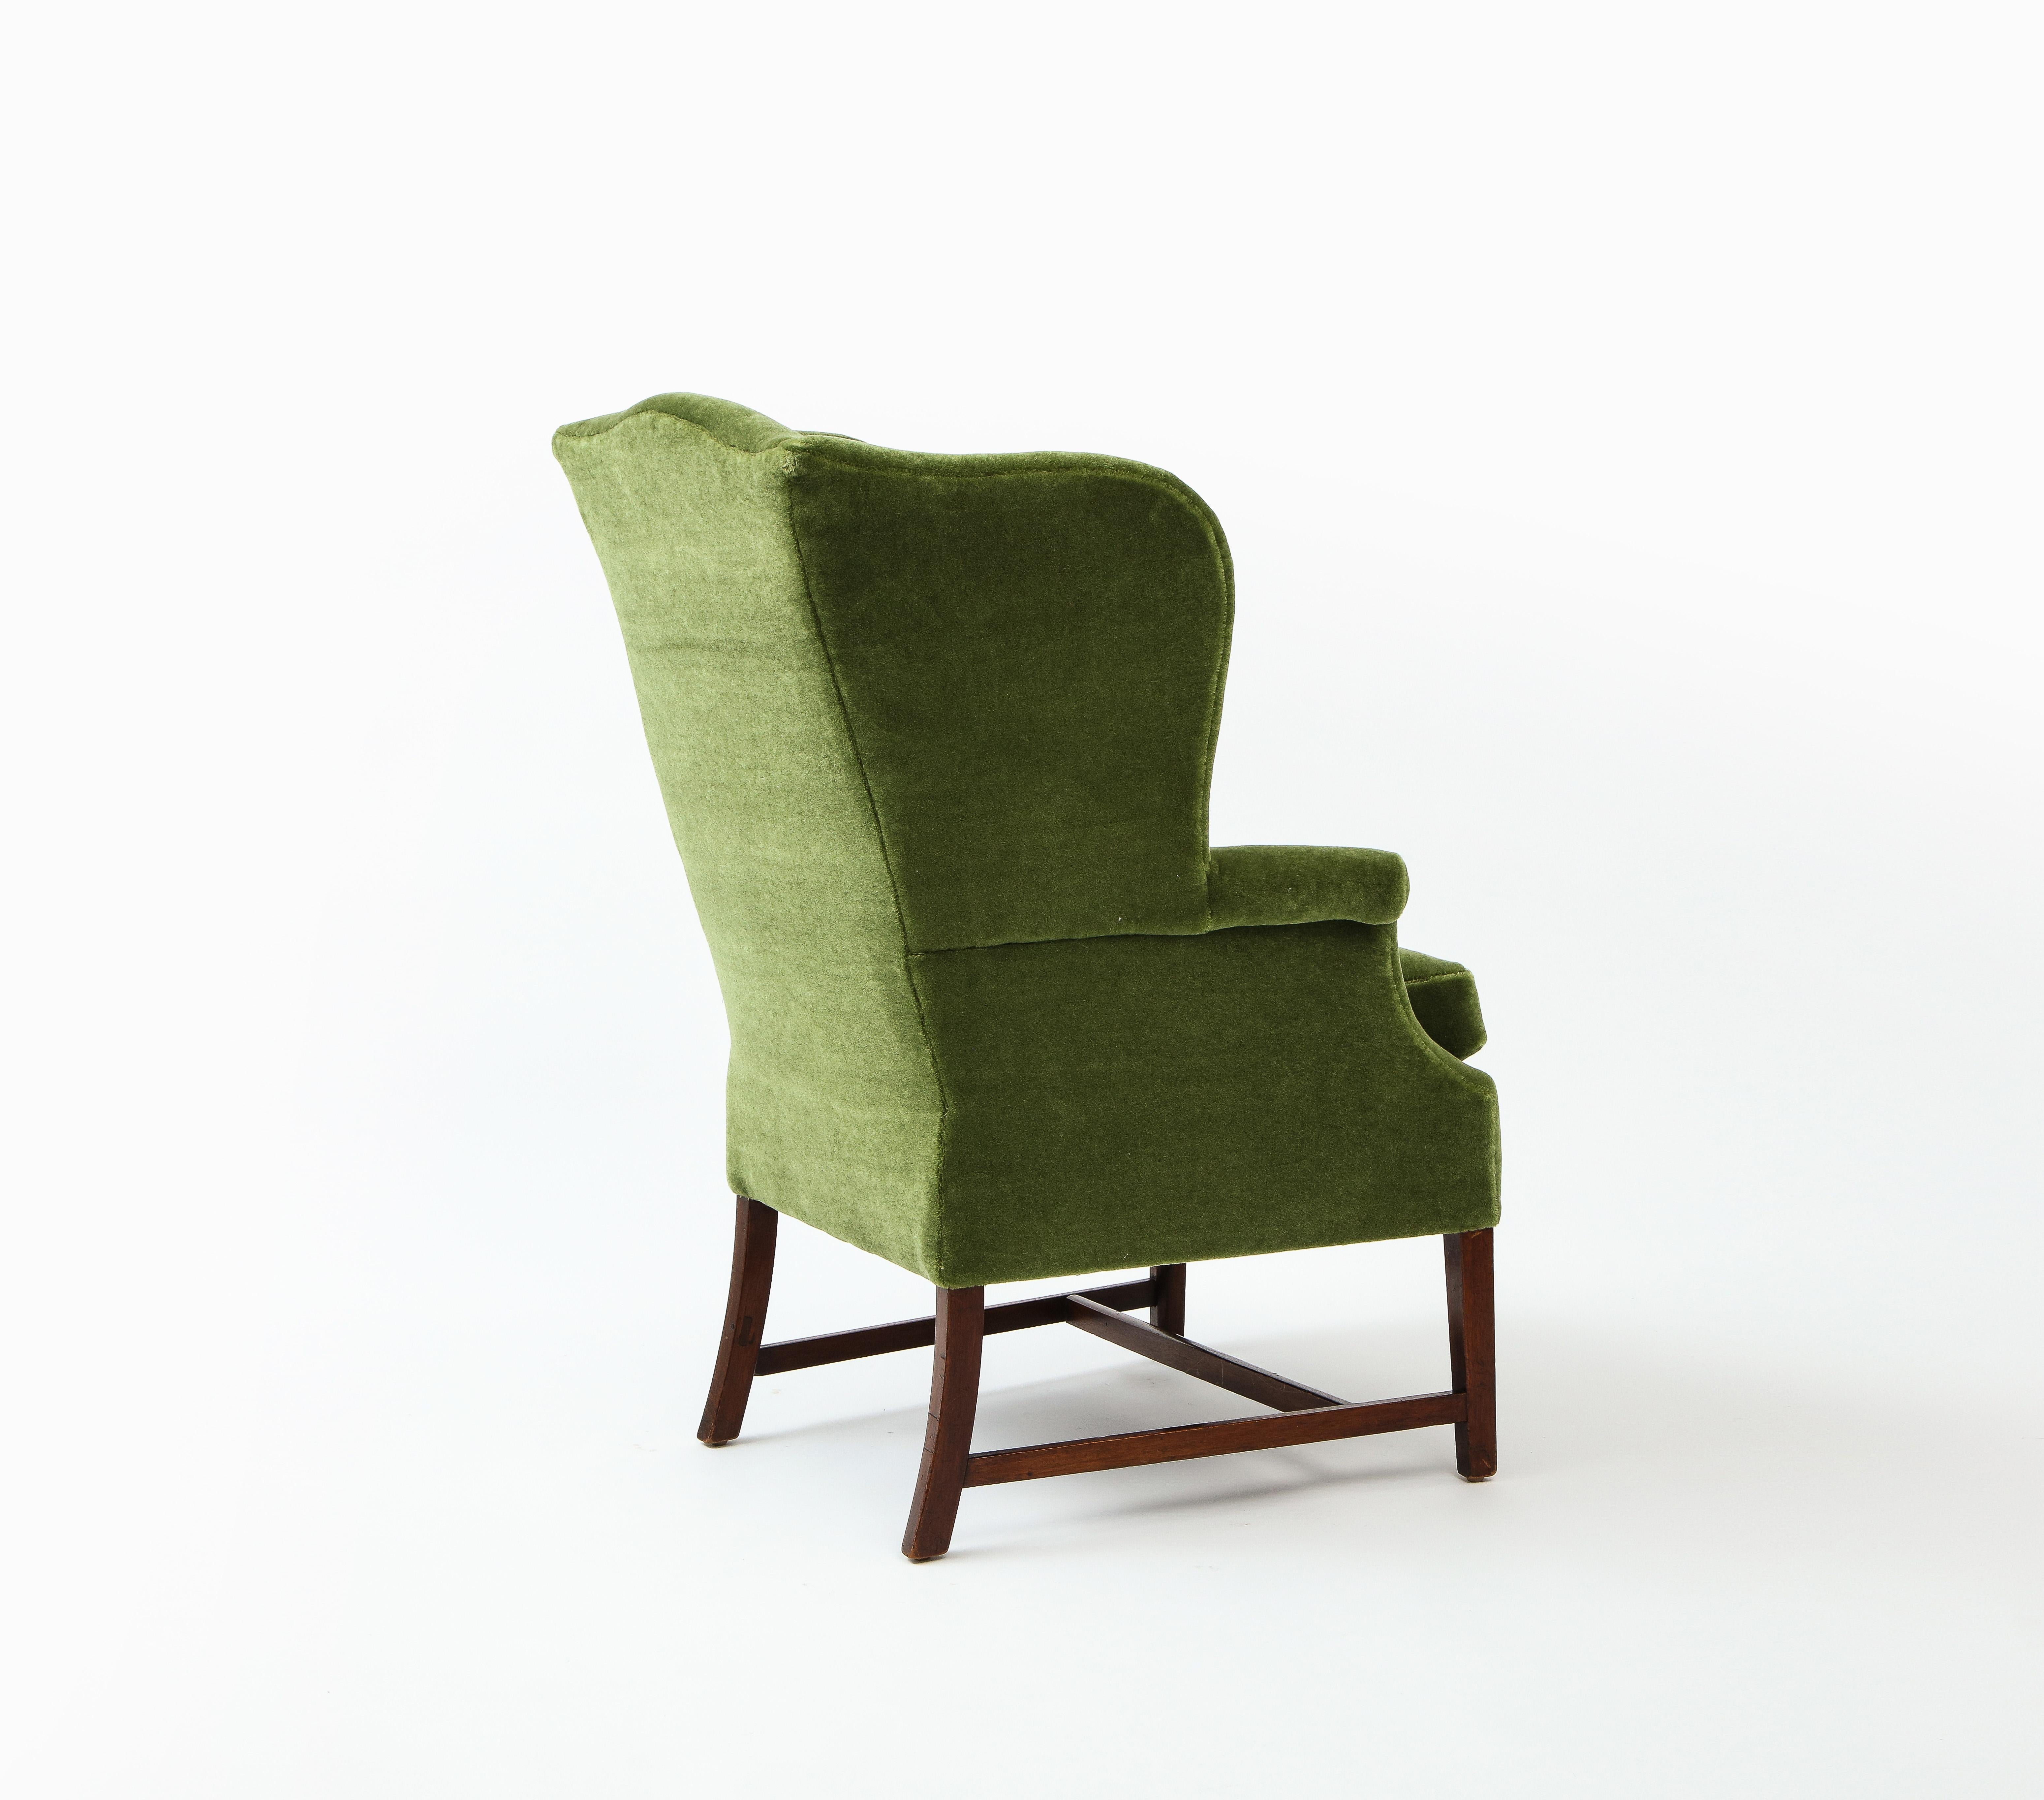 Wingback Library Chair in Green Pierre Frey Mohair, England late 19th Century 4